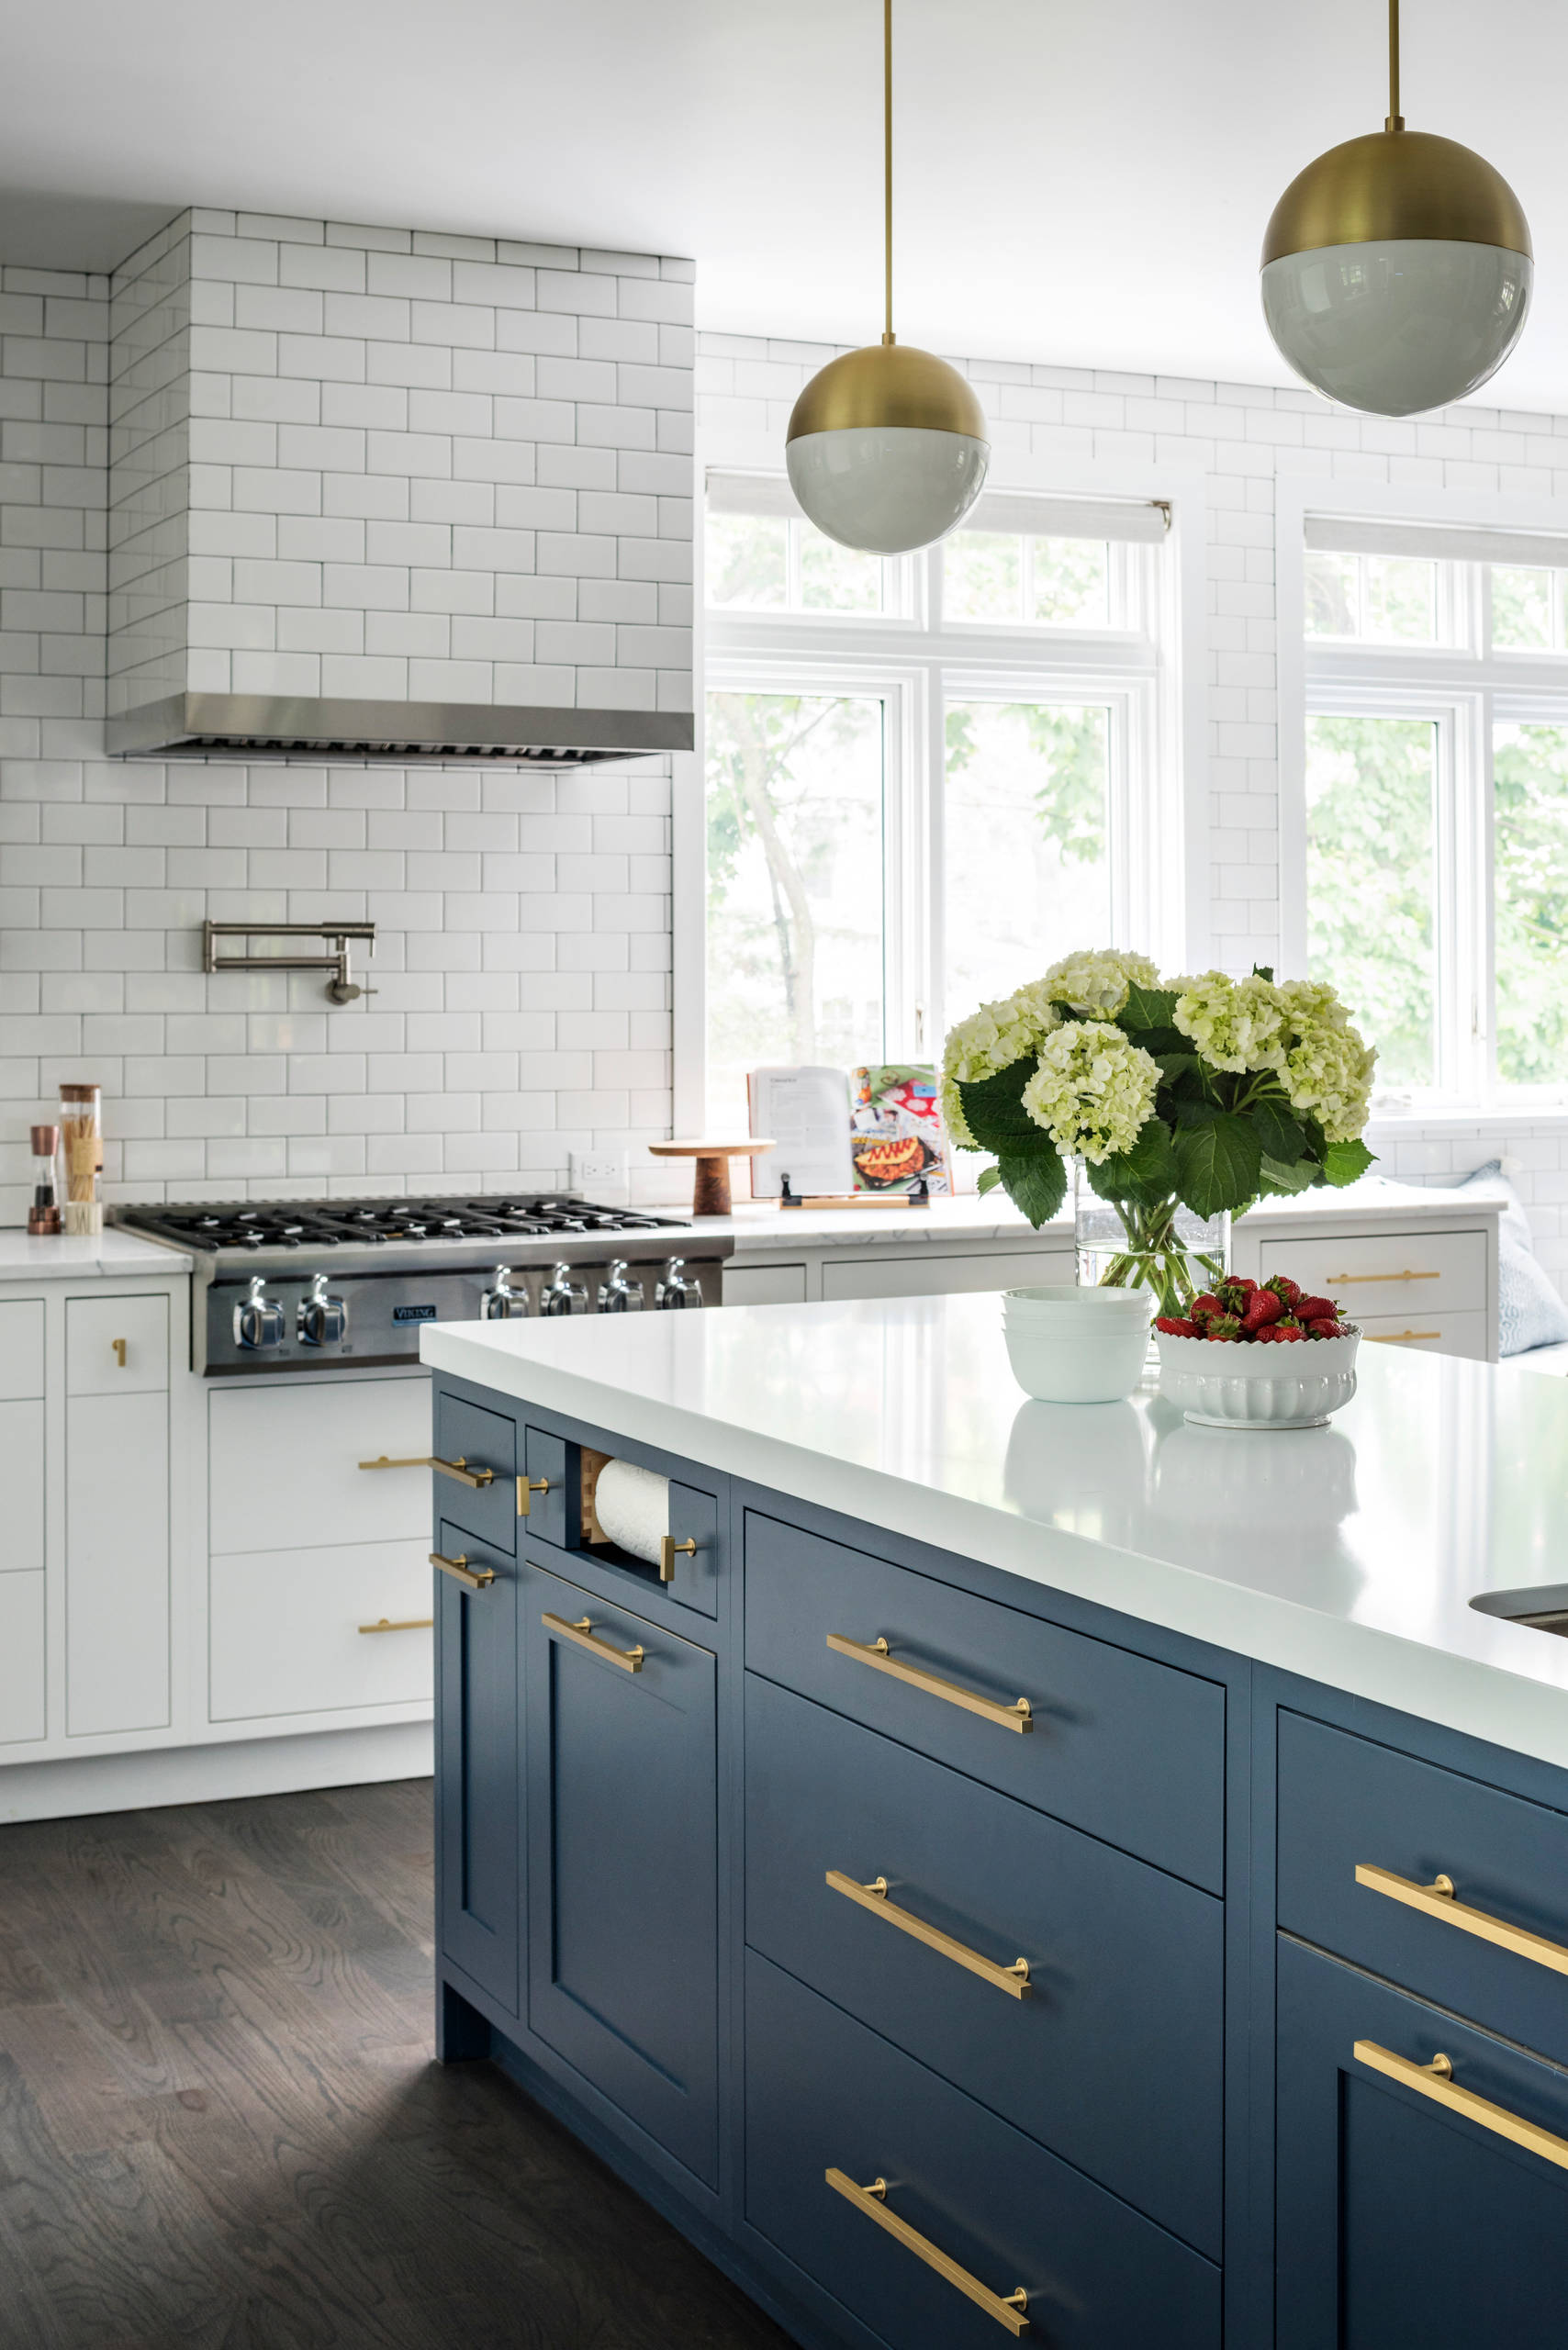 Blue Cabinets And Quartz Countertops, What Color Countertop Goes With Blue Cabinets